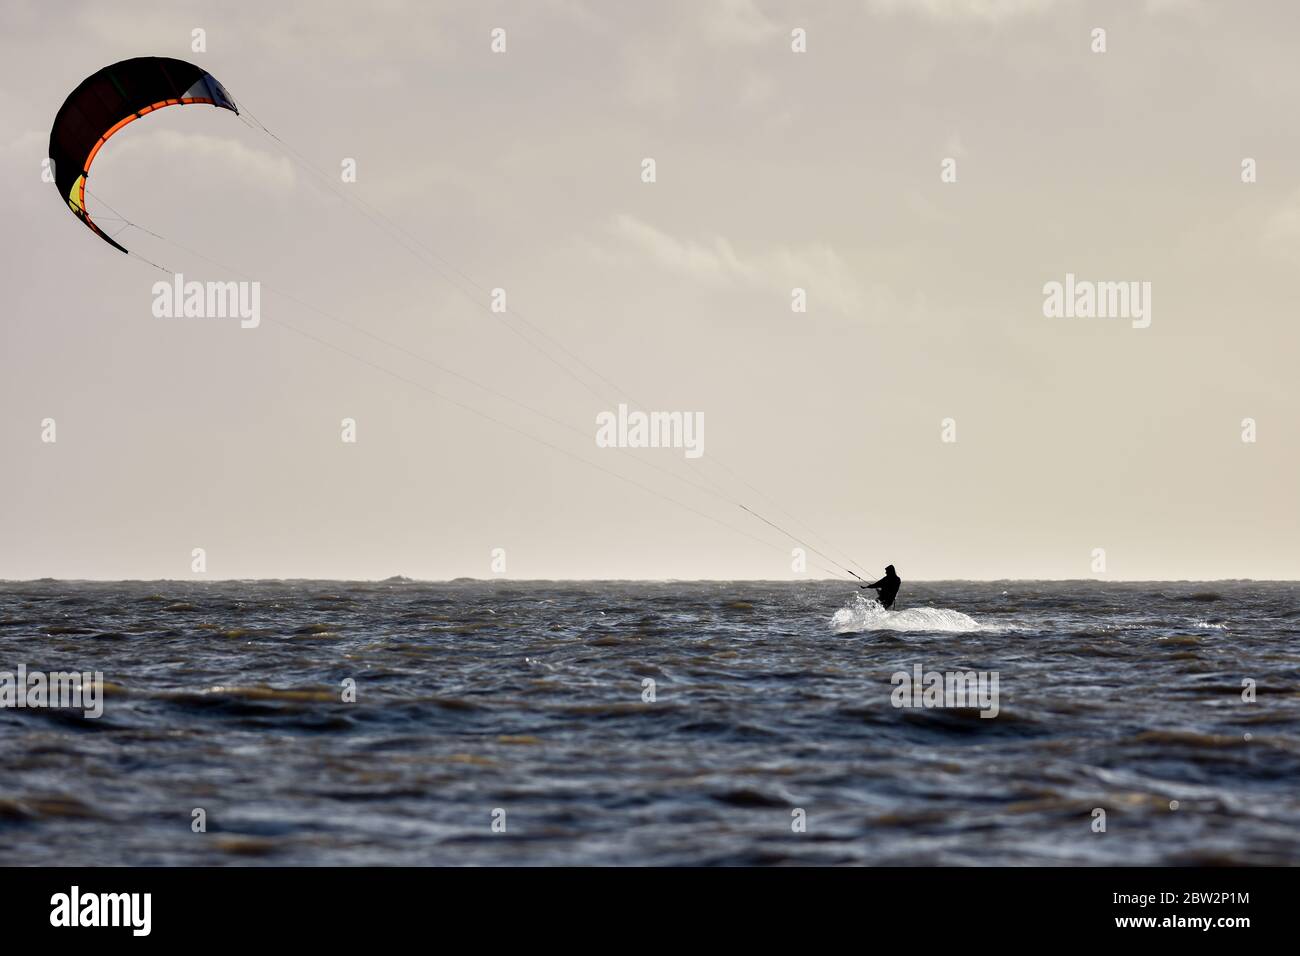 Wide shot of kitesurfer showing the the surfer and the kite Stock Photo